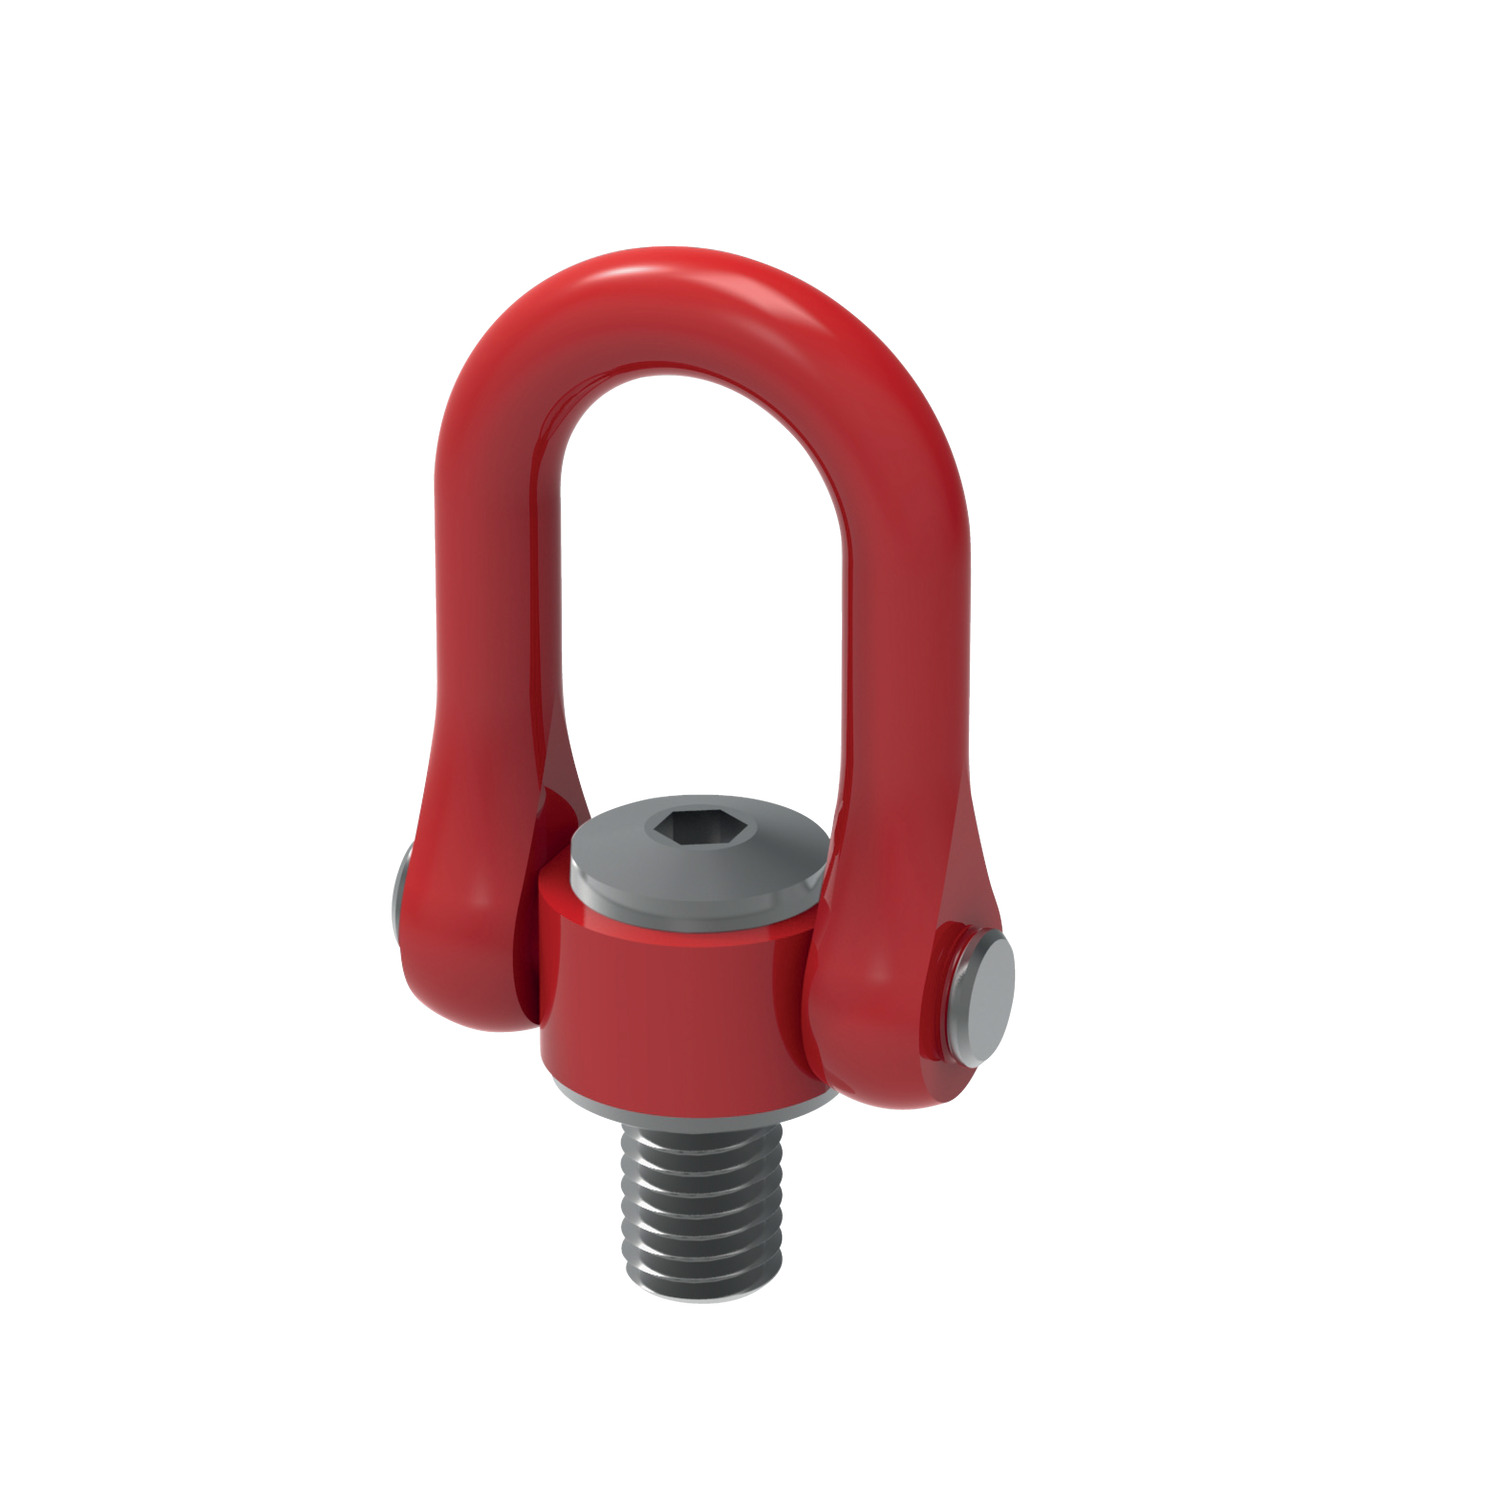 Mega Double Swivel Shackles  Male The ultimate heavy duty lifting ring, available from M64 to M100 threads and capable of lifting up loads of up to 150 tons per ring. No comparable product on the market.